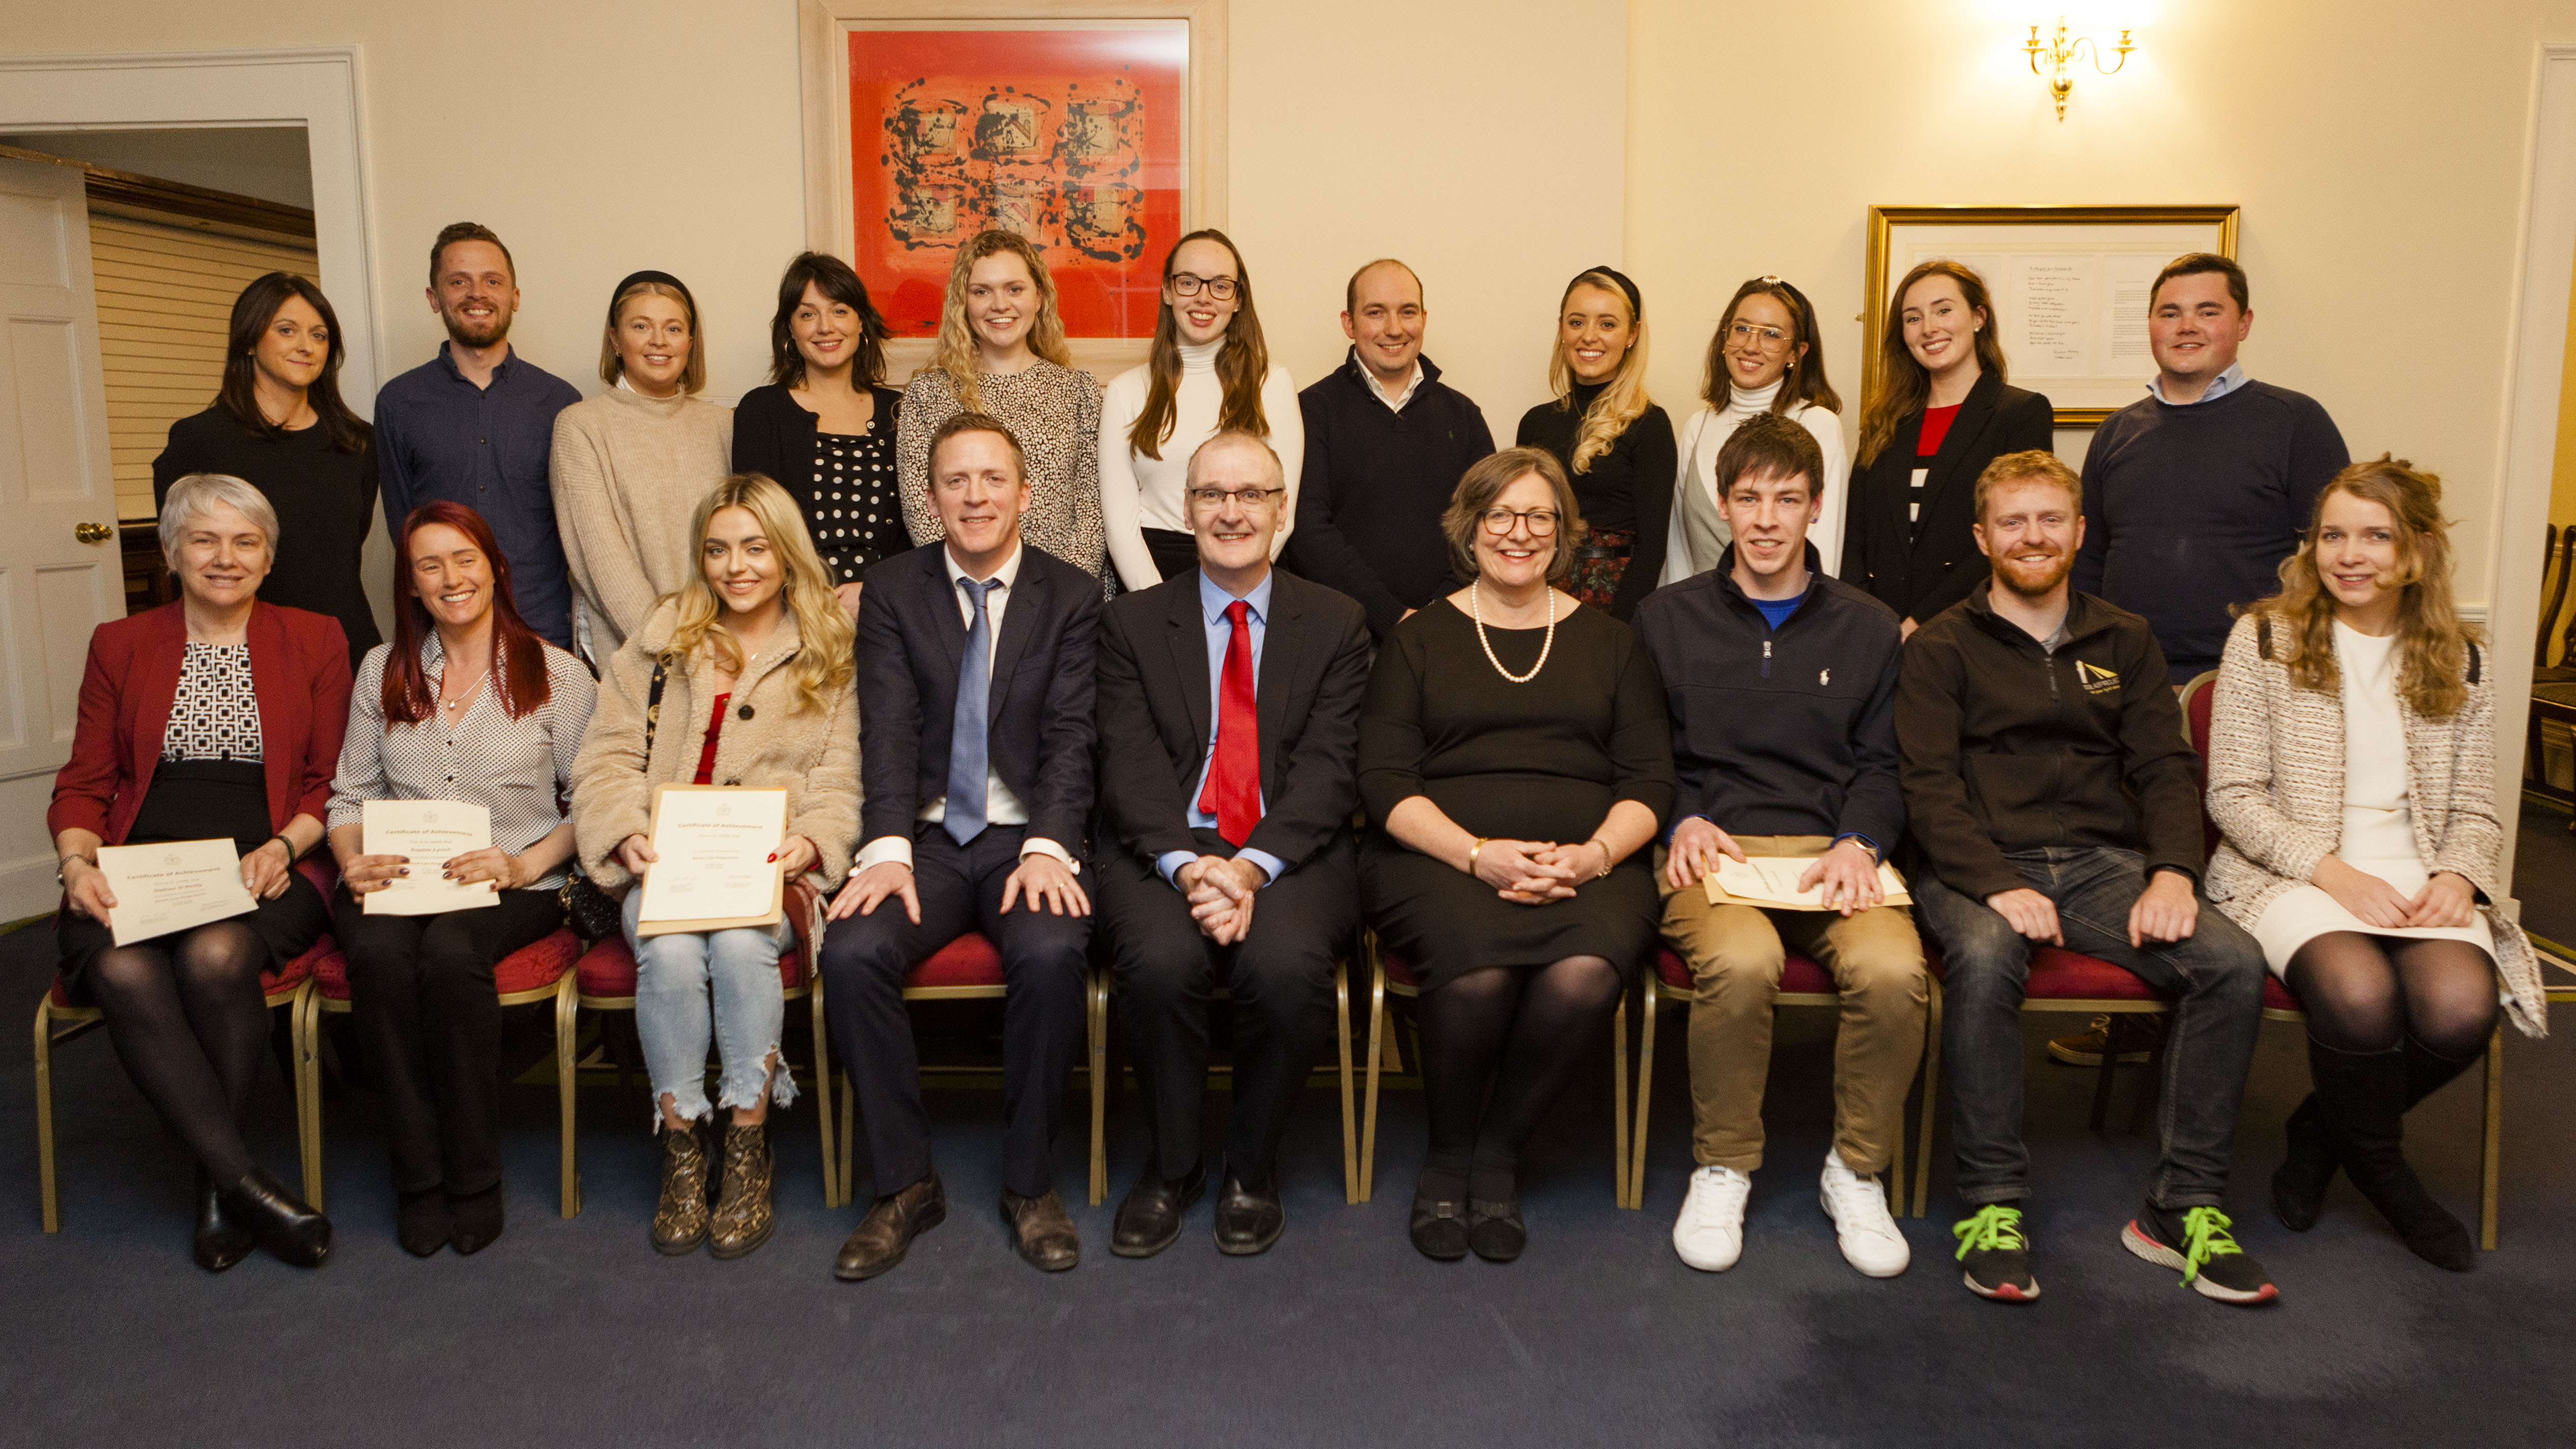 Organisers and volunteers at the Street Law conferral at the Law Society of Ireland on Wednesday 12 Feburary 2020.